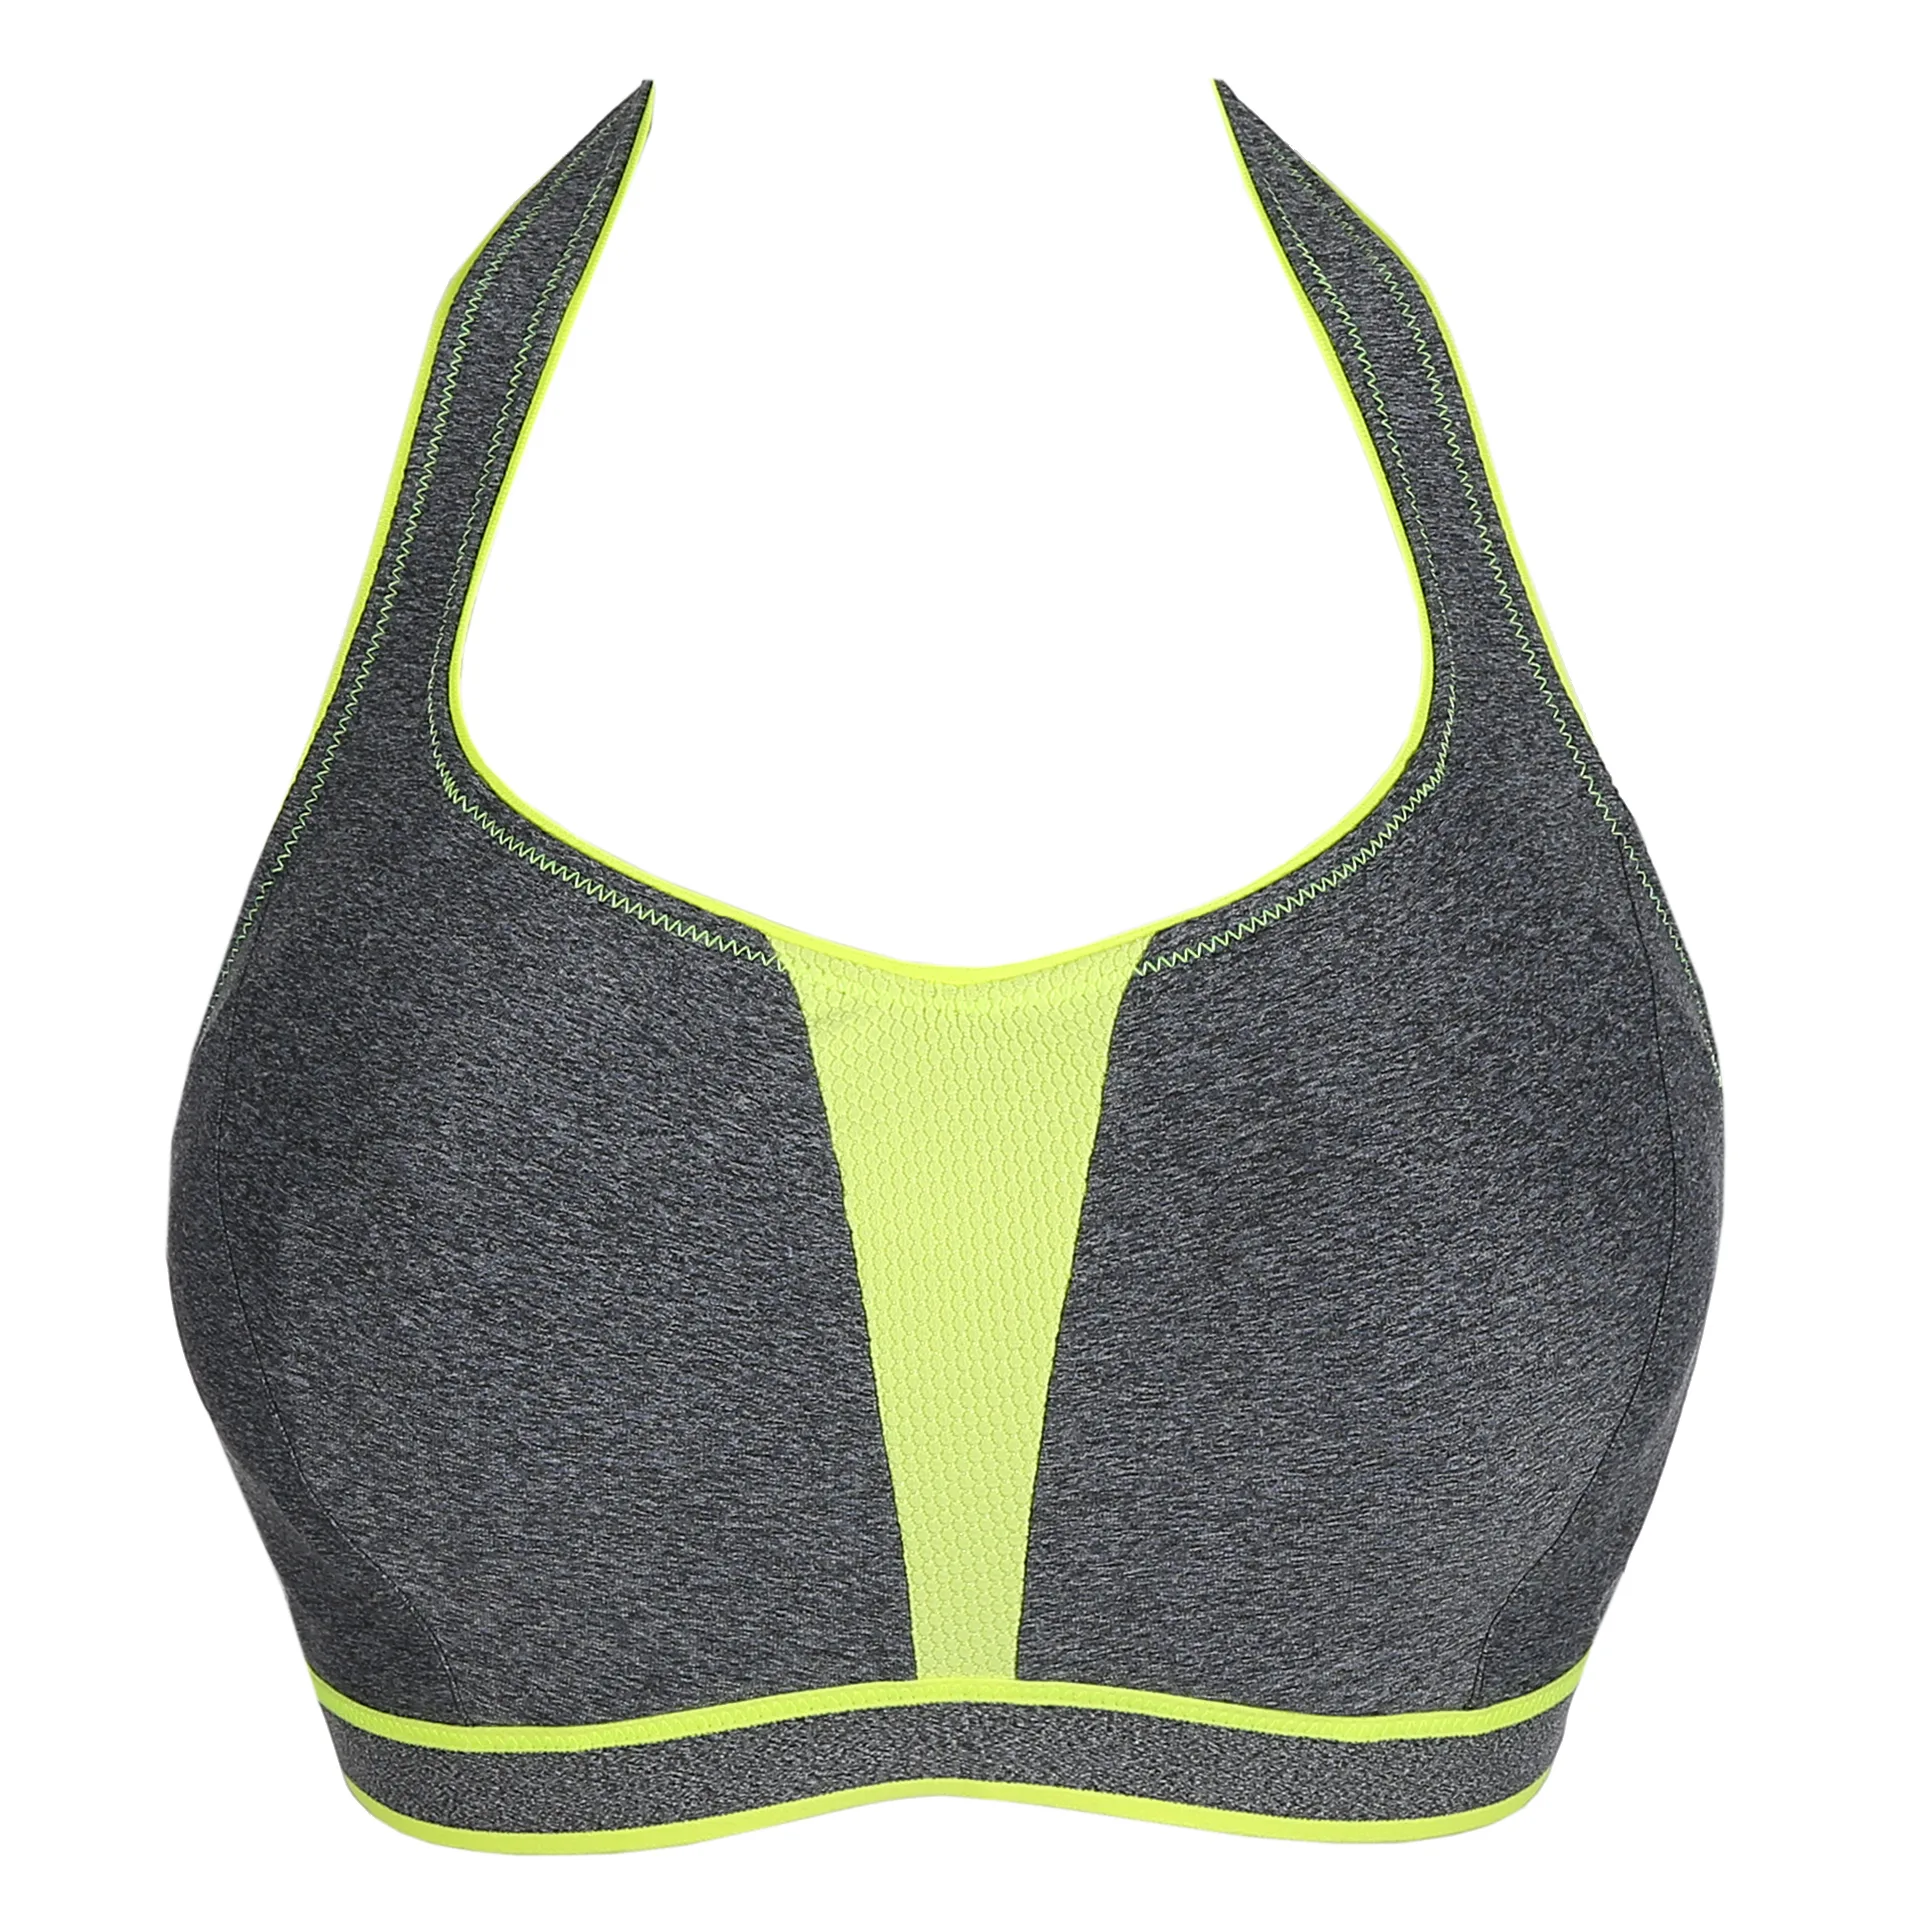 GUESS Doreen Active Bra - Macy's  Womens athletic outfits, Sports bra  collection, Athletic women